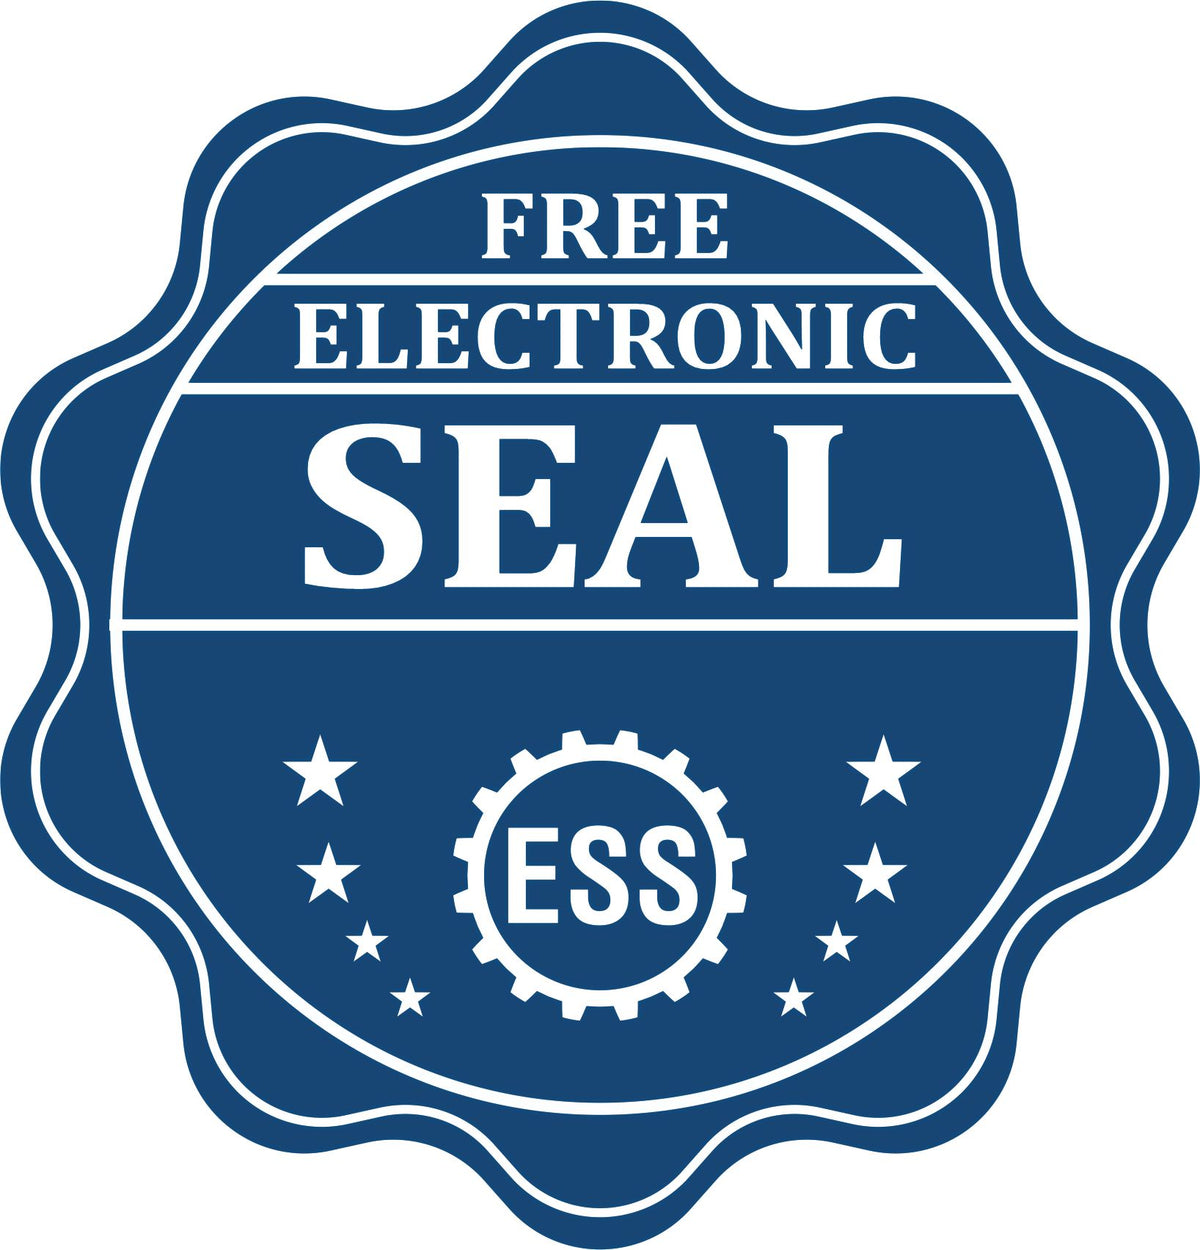 A badge showing a free electronic seal for the Gift Nevada Architect Seal with stars and the ESS gear on the emblem.